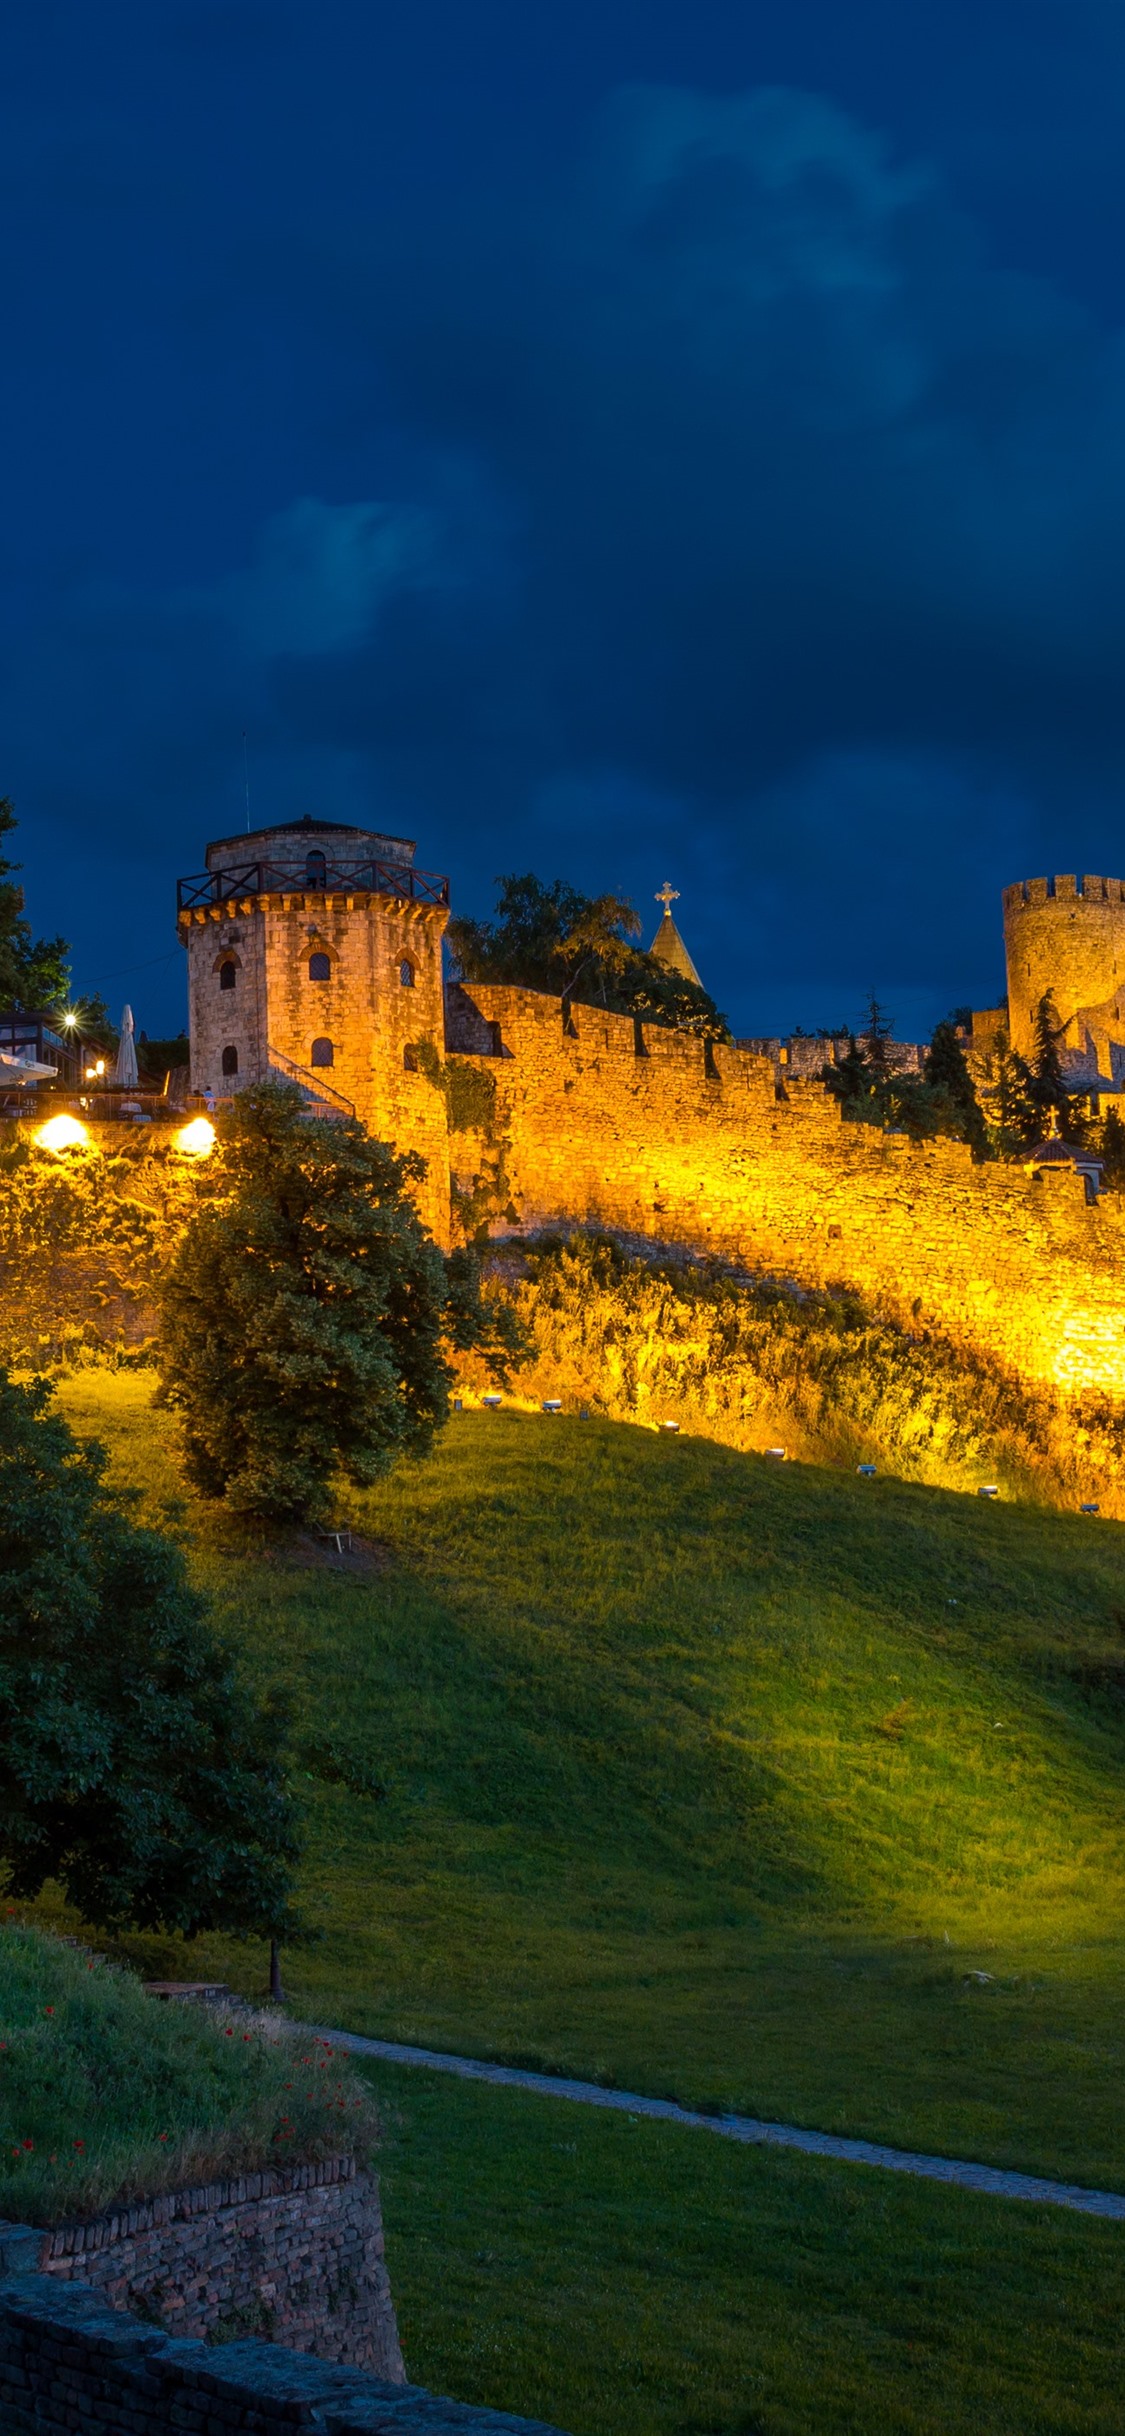 Serbia, Belgrade Fortress, Slope, Trees, Lights, Night 1242x2688 IPhone 11 Pro XS Max Wallpaper, Background, Picture, Image